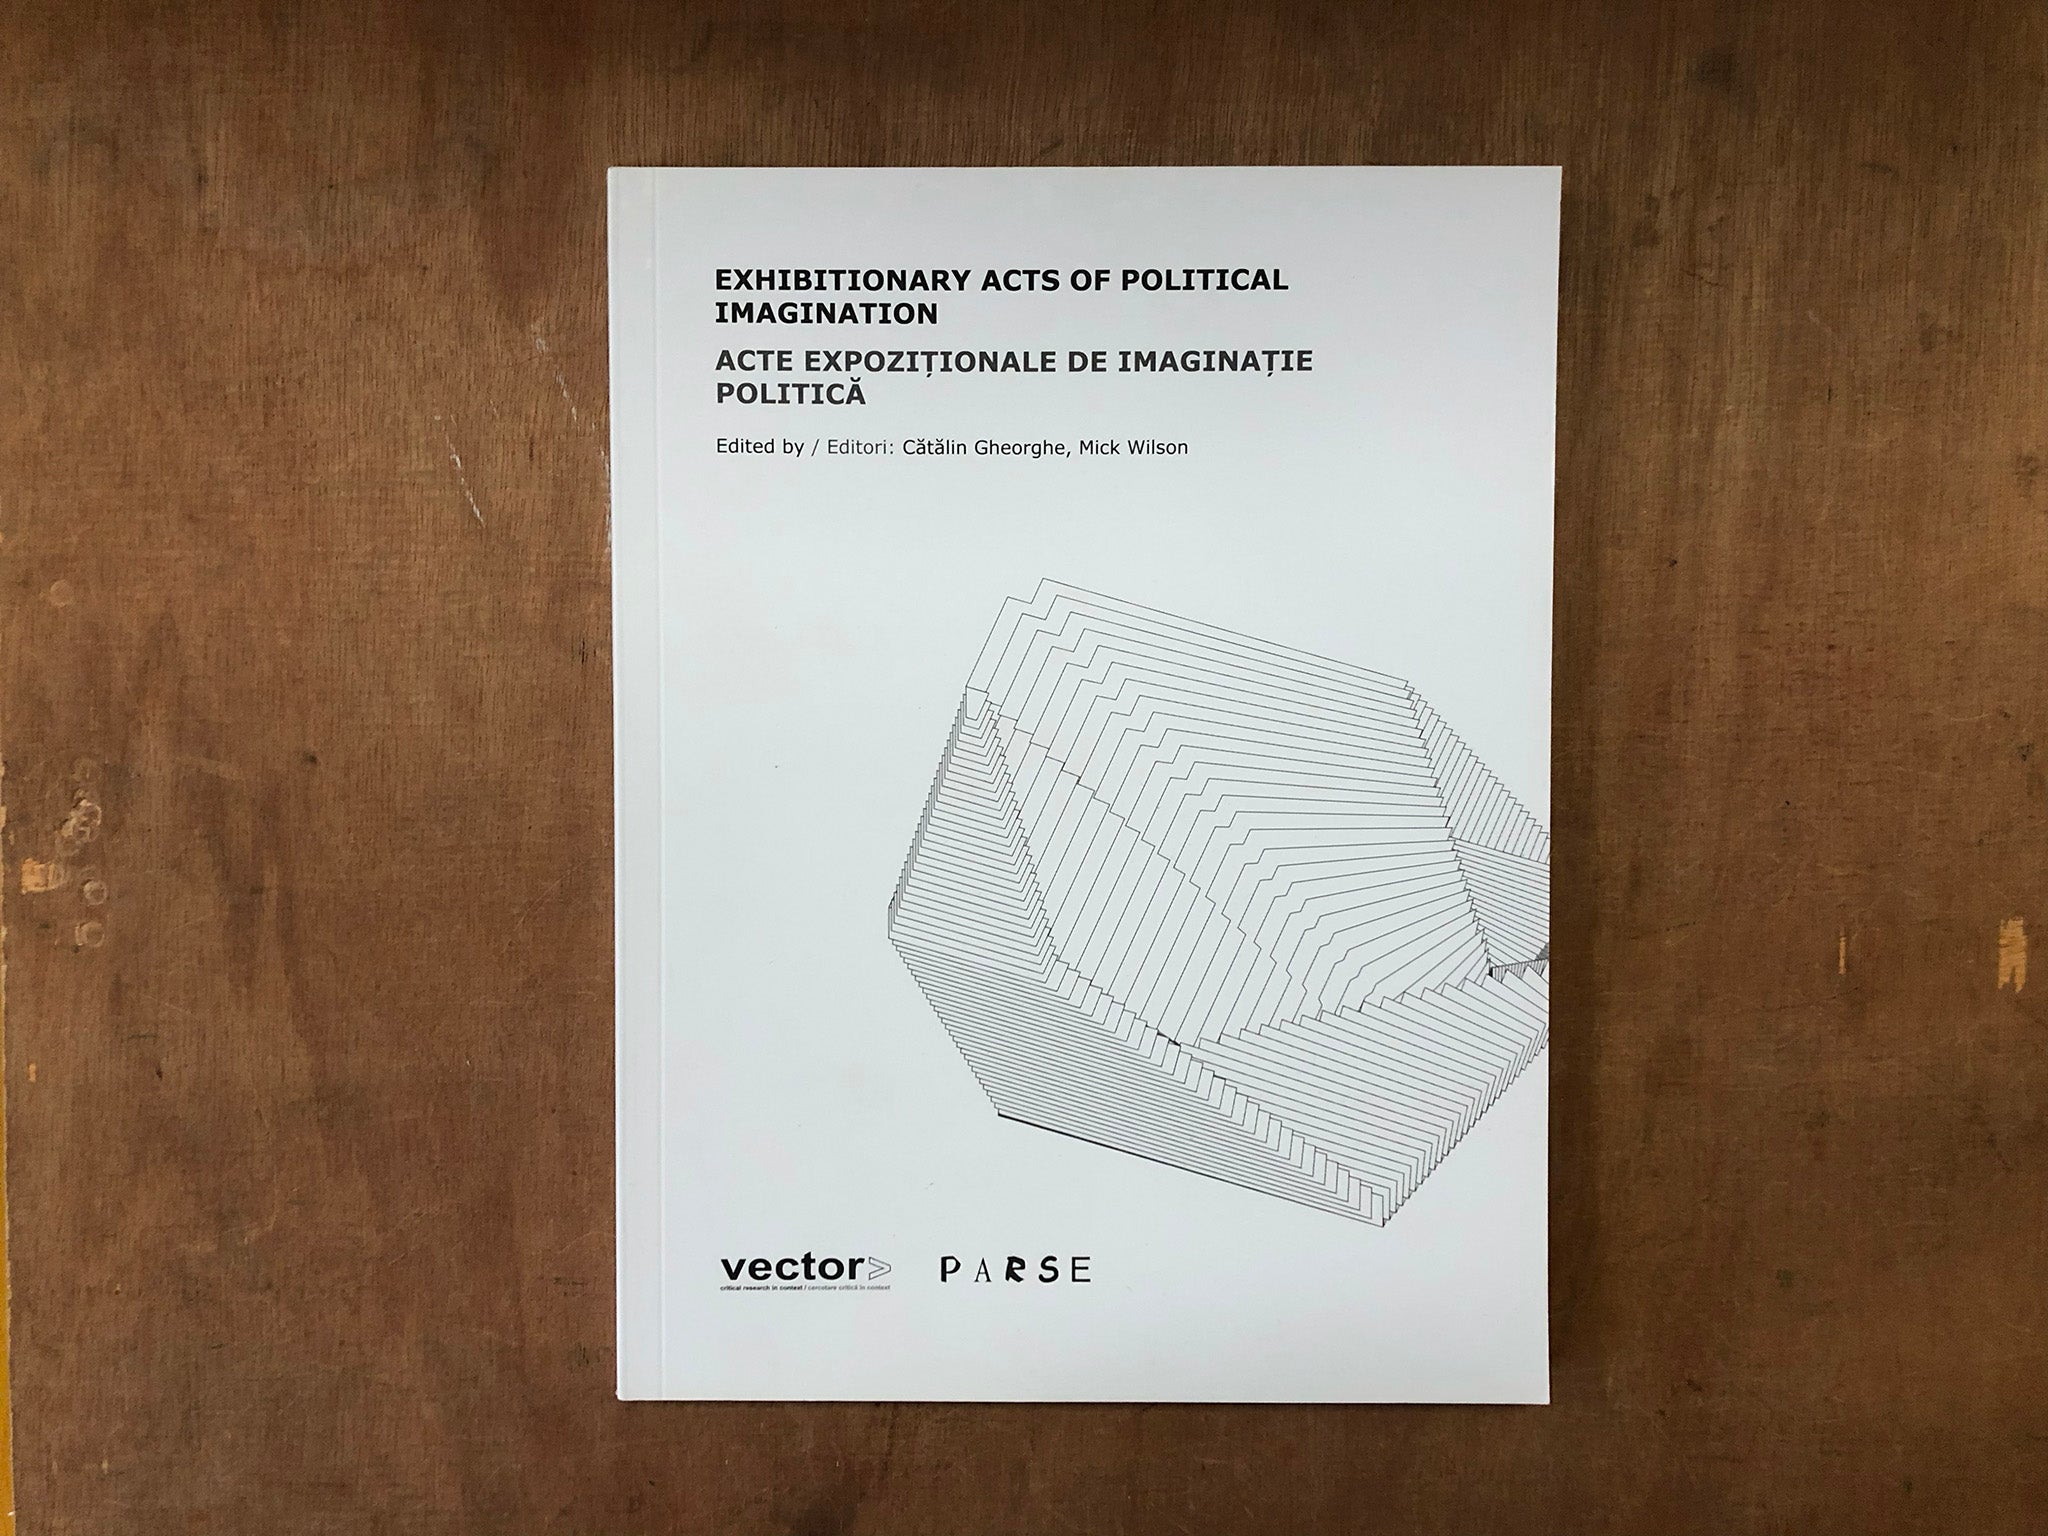 EXHIBITIONARY ACTS OF POLITICAL IMAGINATION Edited by: Catalin Gheorghe and Mick Wilson